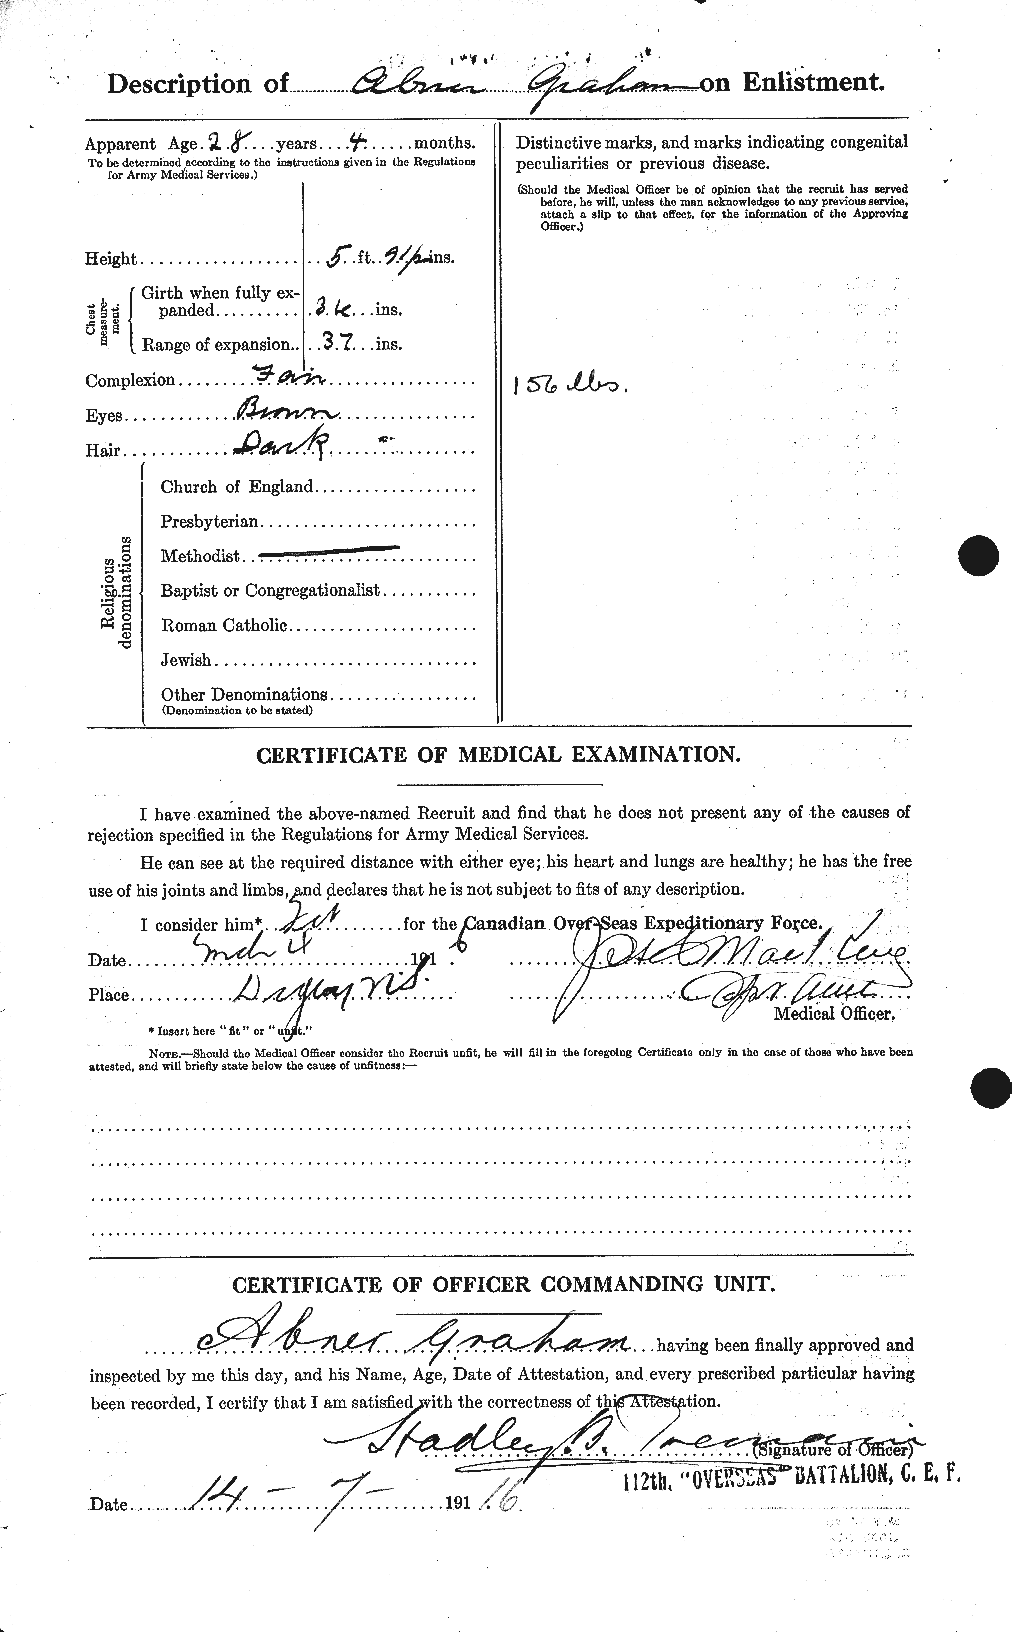 Personnel Records of the First World War - CEF 359559b